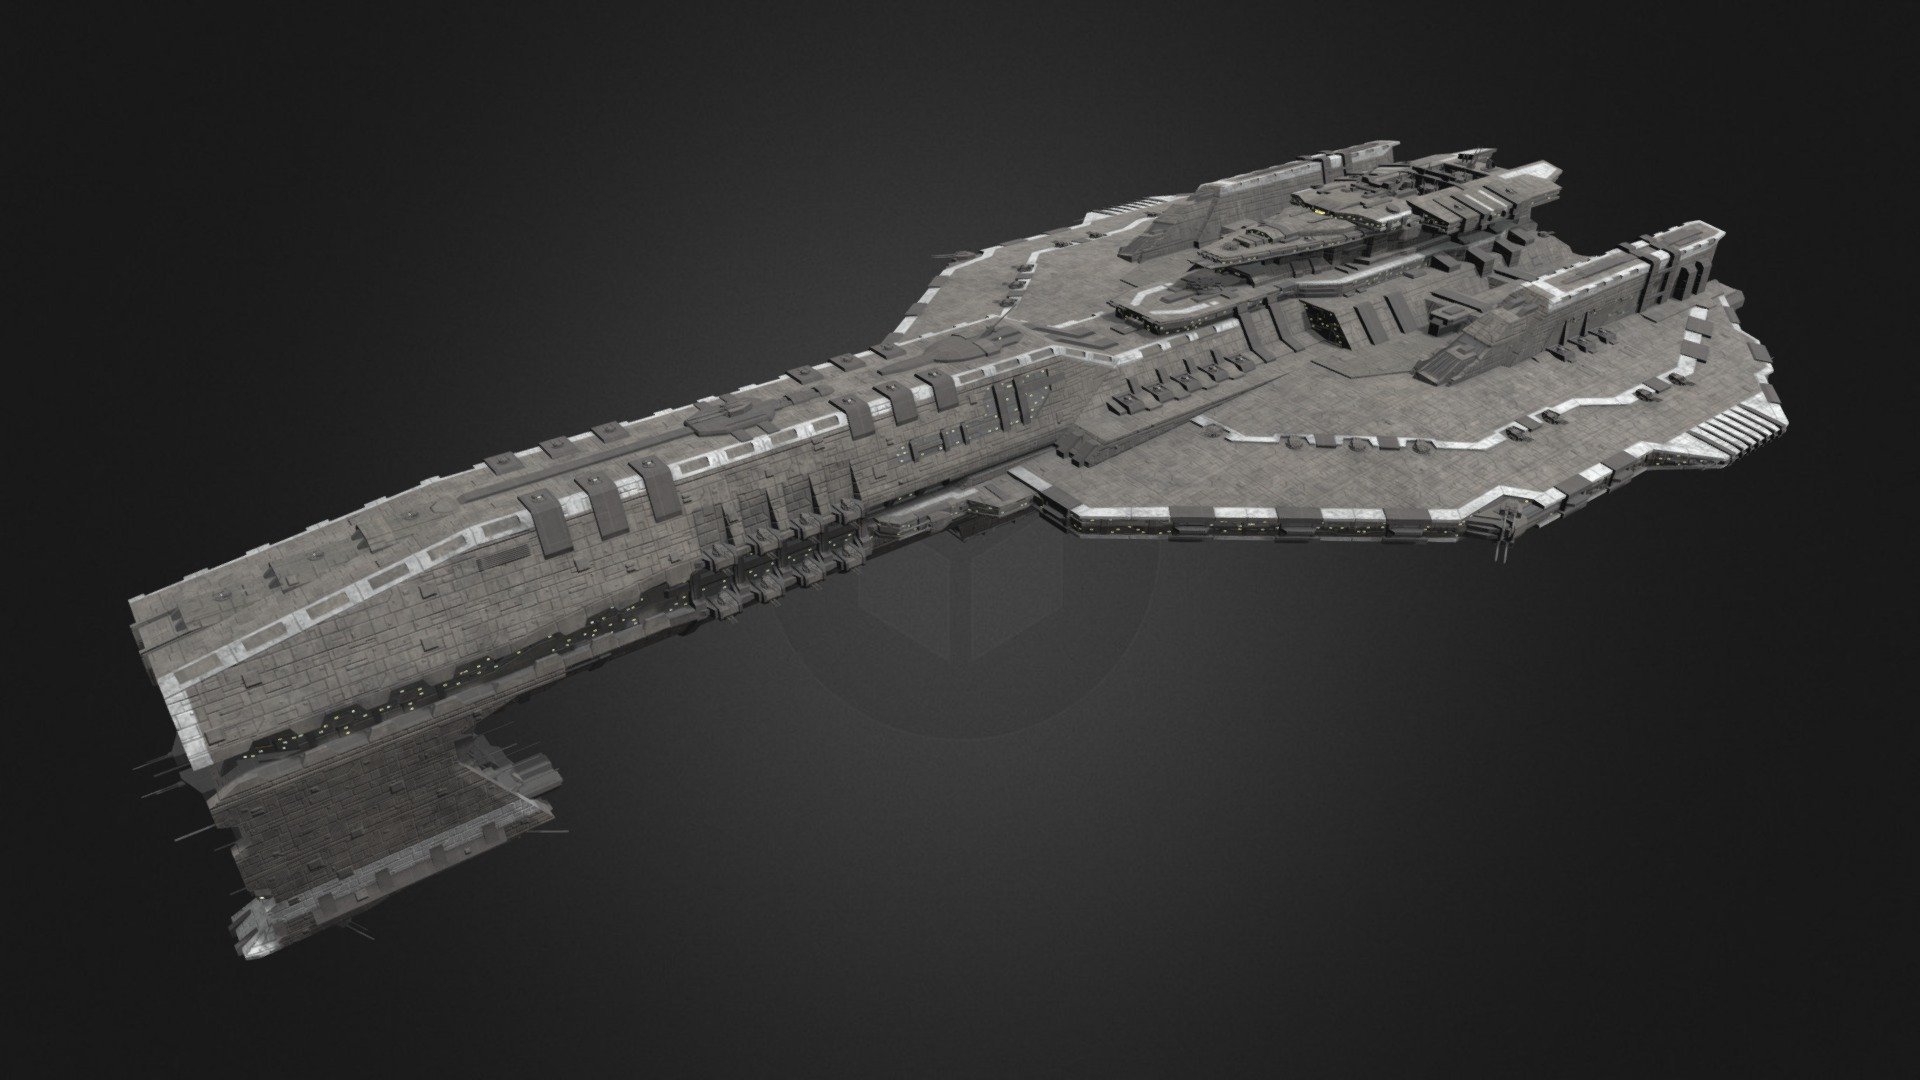 My Rendition of the Keldabe Class Battle ship from Star Wars Empire at War. Please do not use in other Star wars Empire at War Mods. I want to impove on my Last Keldabe design by making the model more angular and look closer to the original design. I took refrence from other Keldabe designs on Artstaion such as 1st_Fleet and Daniel T., along with some from the various mods out there, so if you like mine go check there's out to.

Owner: Mandalore
Constructor: Mando Motors
Class: Battleship
Purpose: Frontline Brawler
Armament: Over a hundred Dual Laser Turrets, 52 Quad Medium Turbolaser Turrets, 16 Quad Heavy Turbolaser Turrets, 17 Sextuple Heavy Turbolaser Turrets, and 96 concussion missile tubes.
Carries: 6 Fighter squadrons, 1 Heavy Fighter squadron, and 1 Bomber squadron.
Lenght: 1,700m 3d model